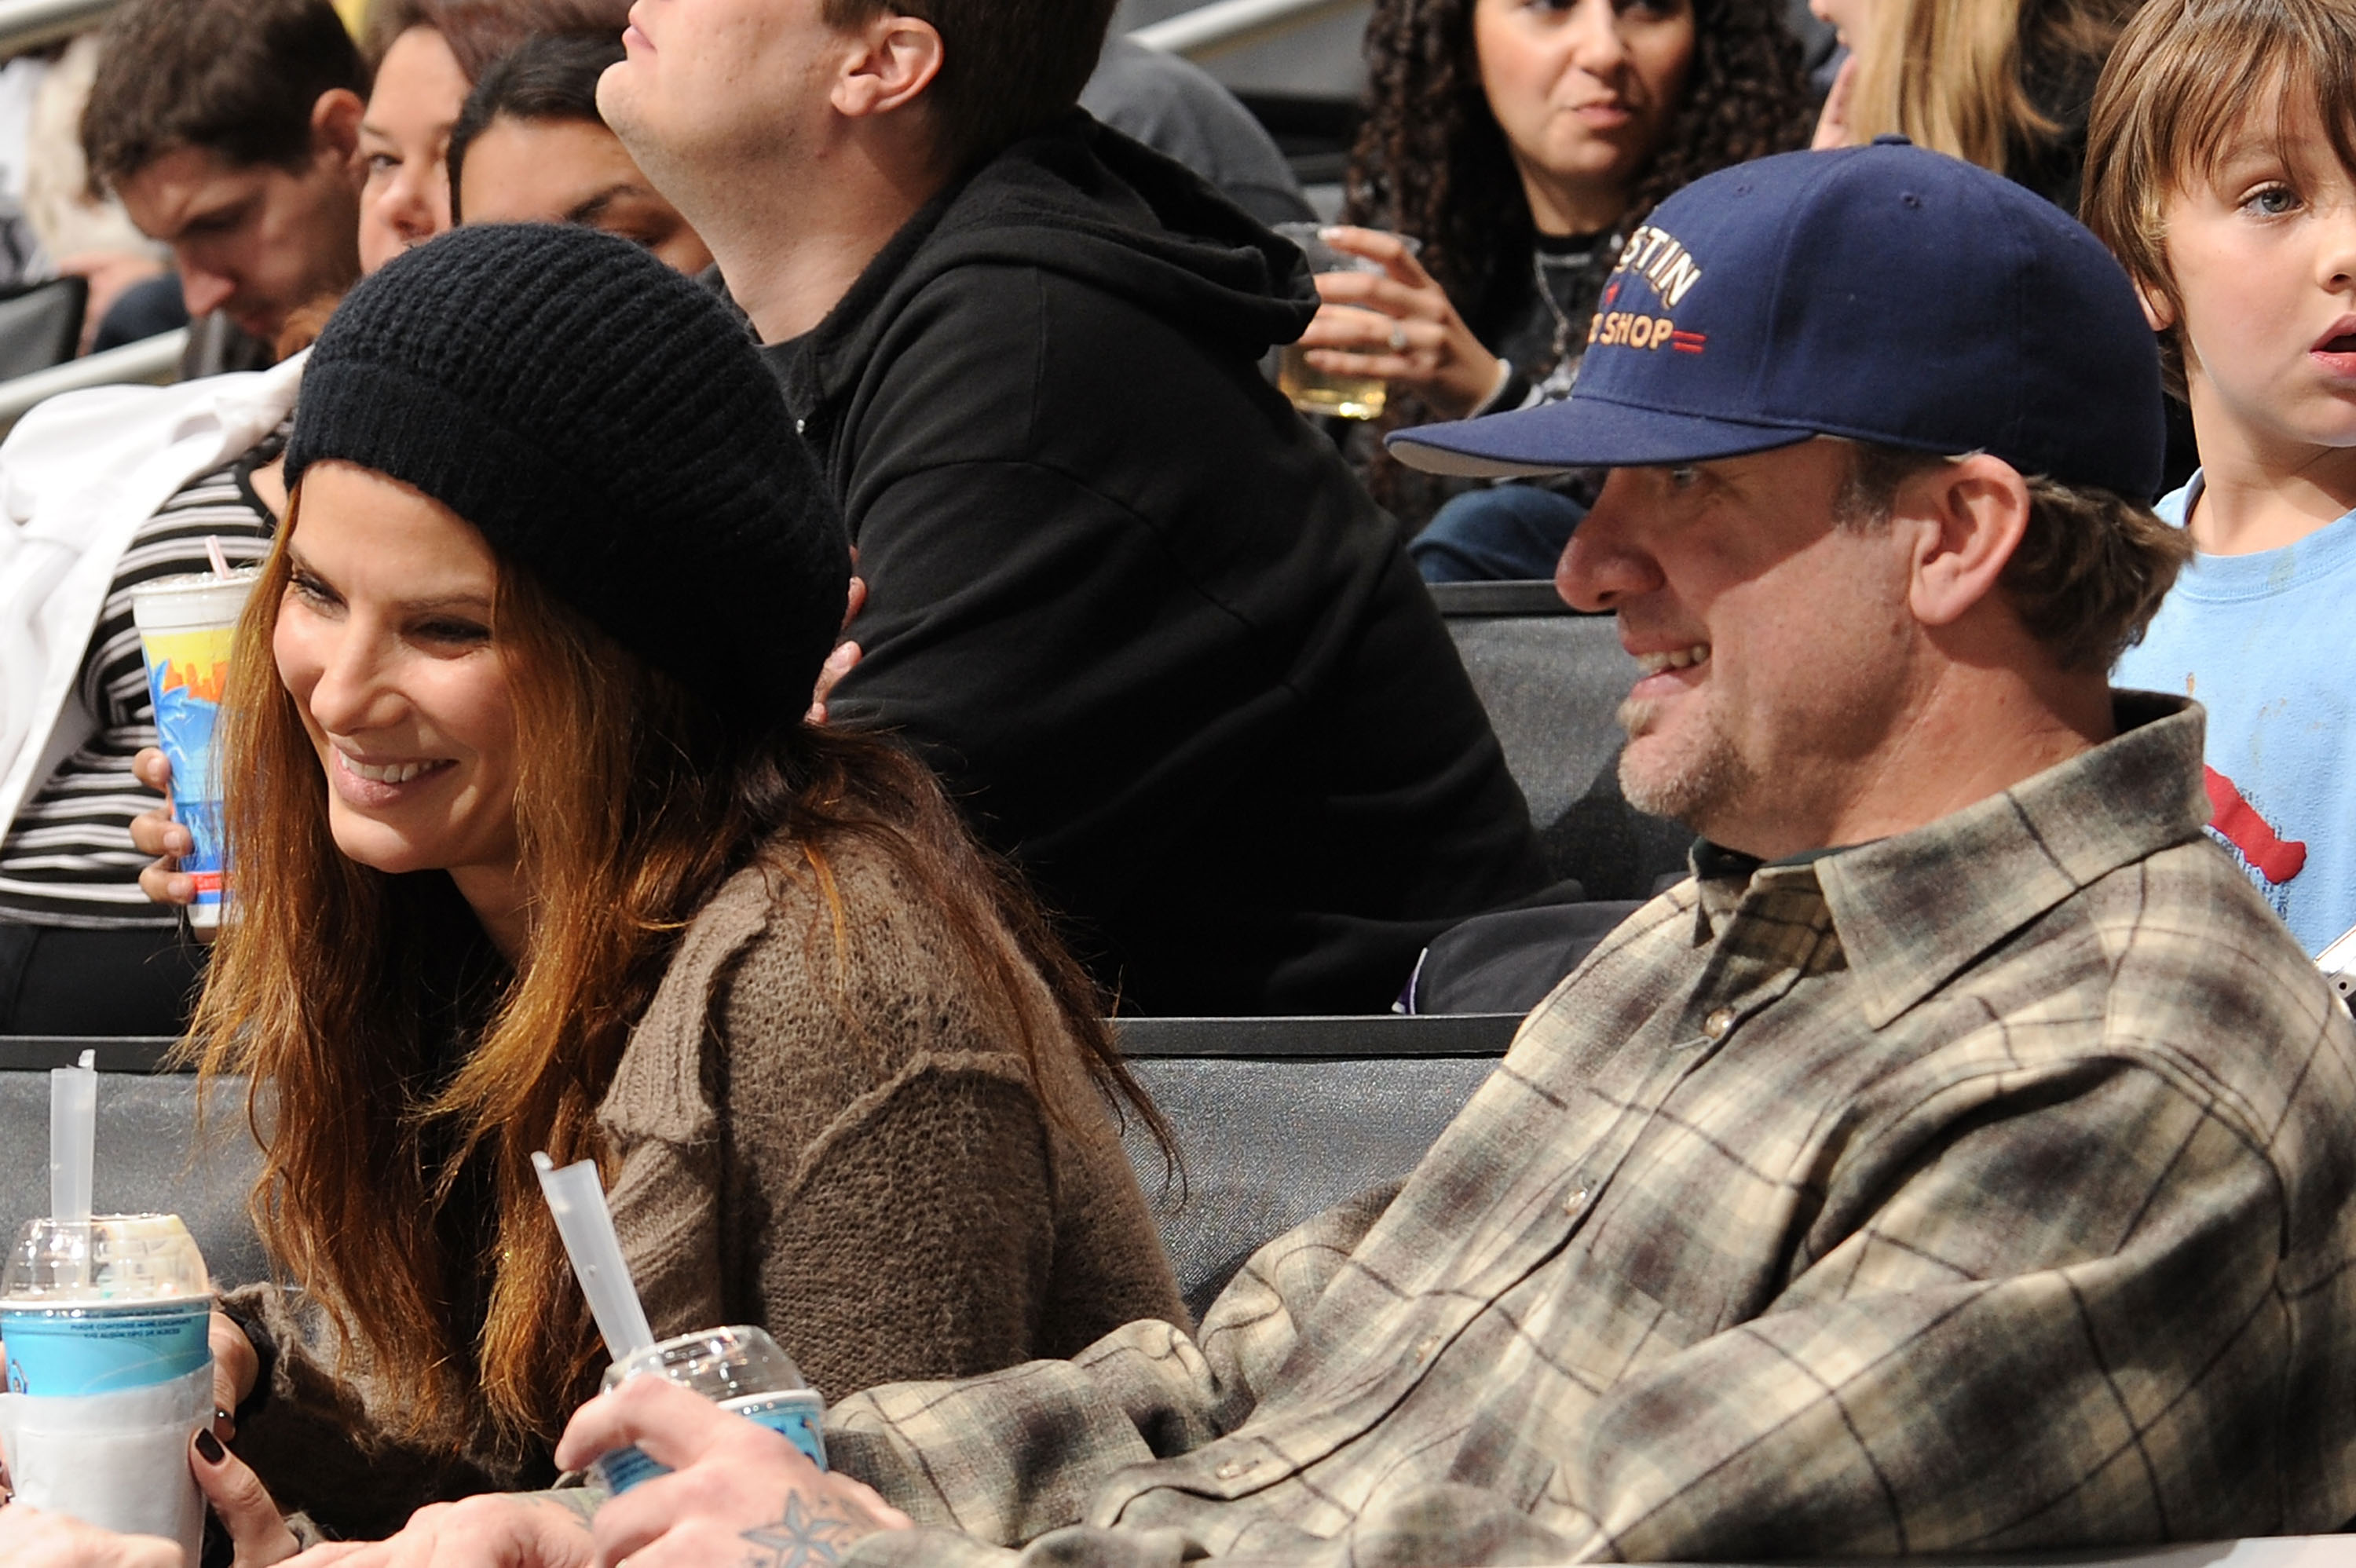 Sandra Bullock and Jesse James on November 11, 2008, at Staples Center in Los Angeles, California. | Source: Getty Images